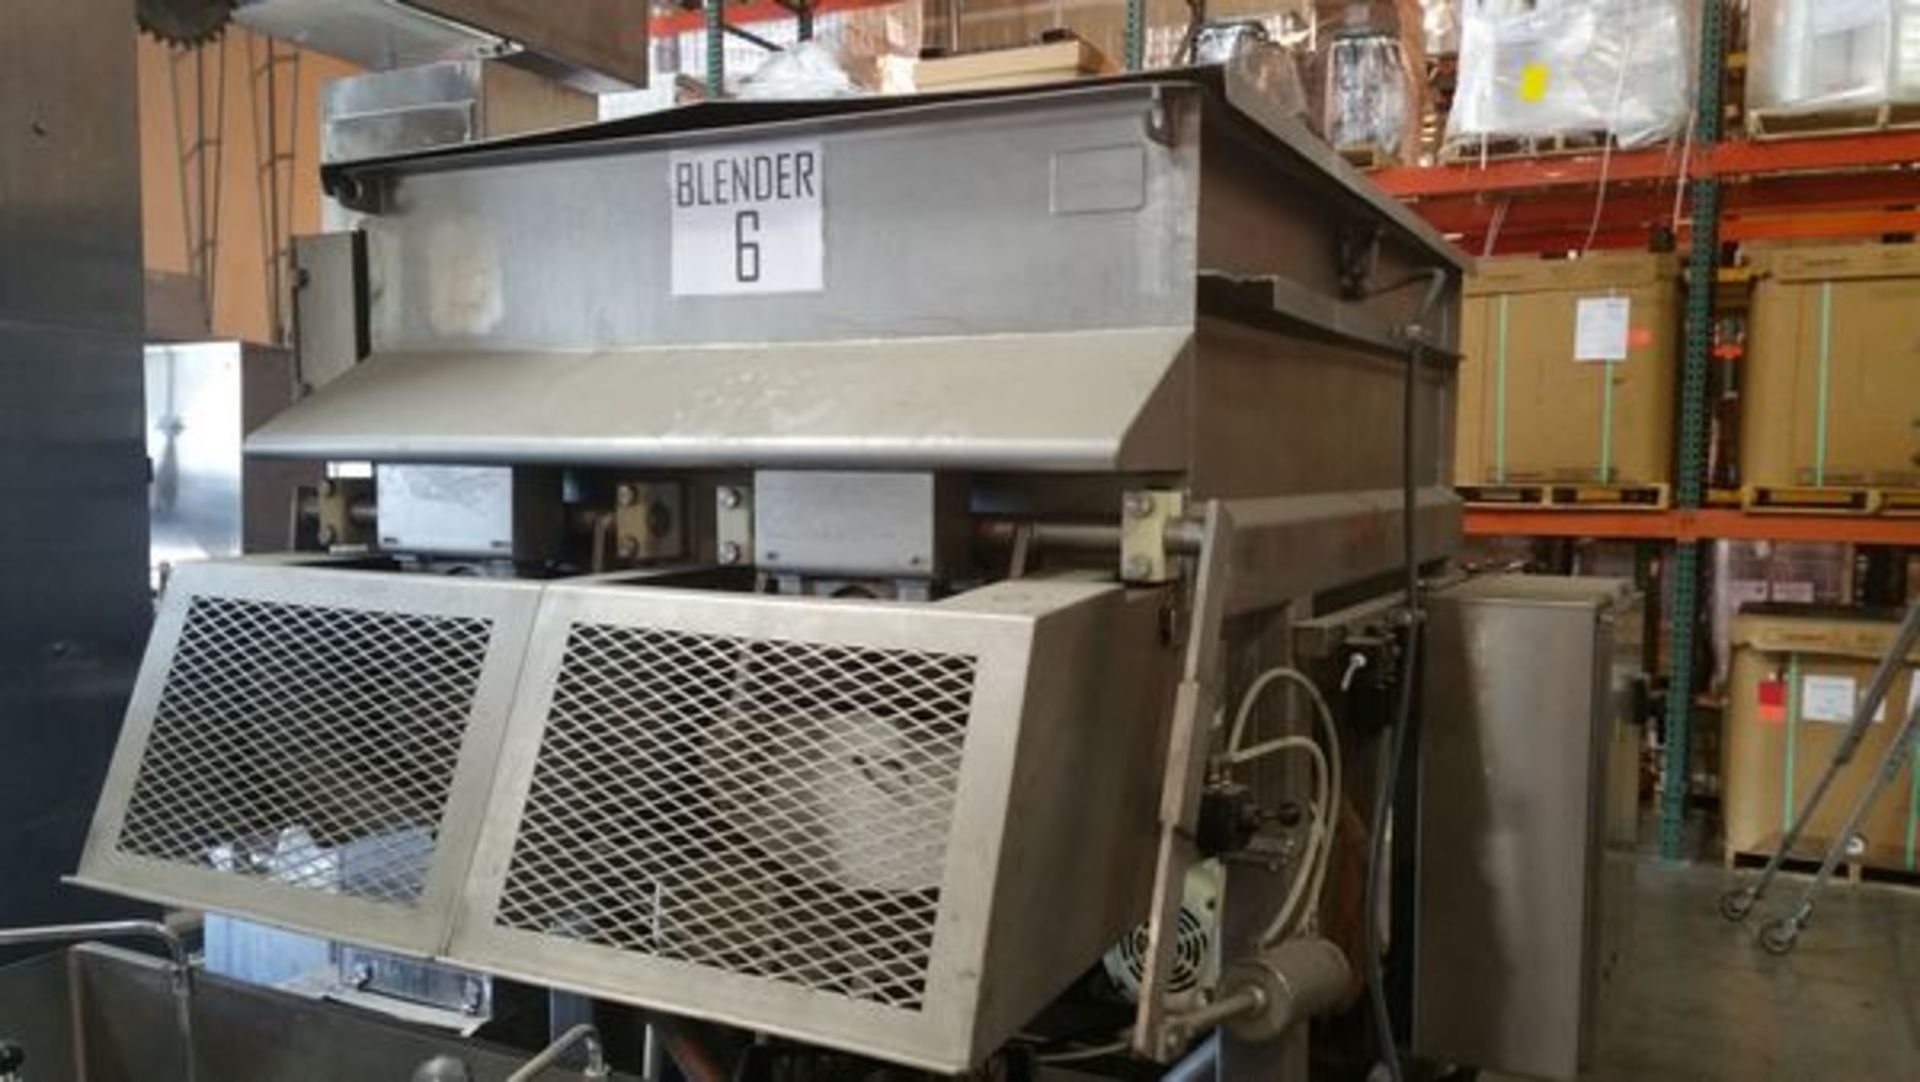 Rietz Model RS28K52066 25HP Twin Shaft Blender Approximately 50 cu/ft 8'x5'x5' Includes all S/S - Image 3 of 4